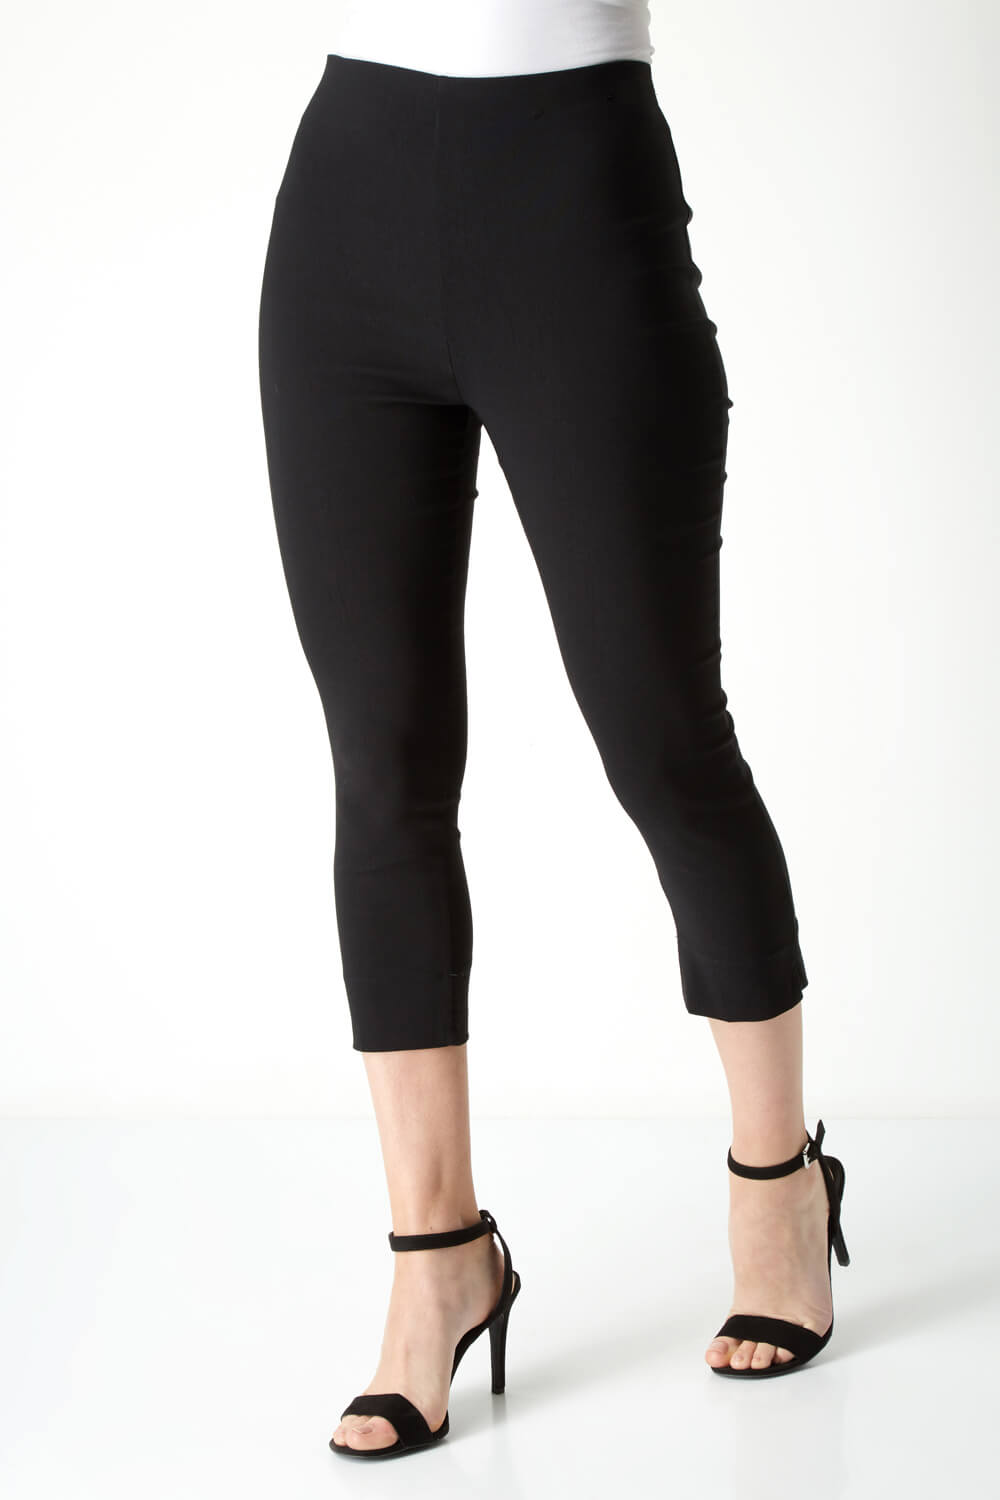 IC Collection Slim Stretch Knit Cropped Pants  Dillards